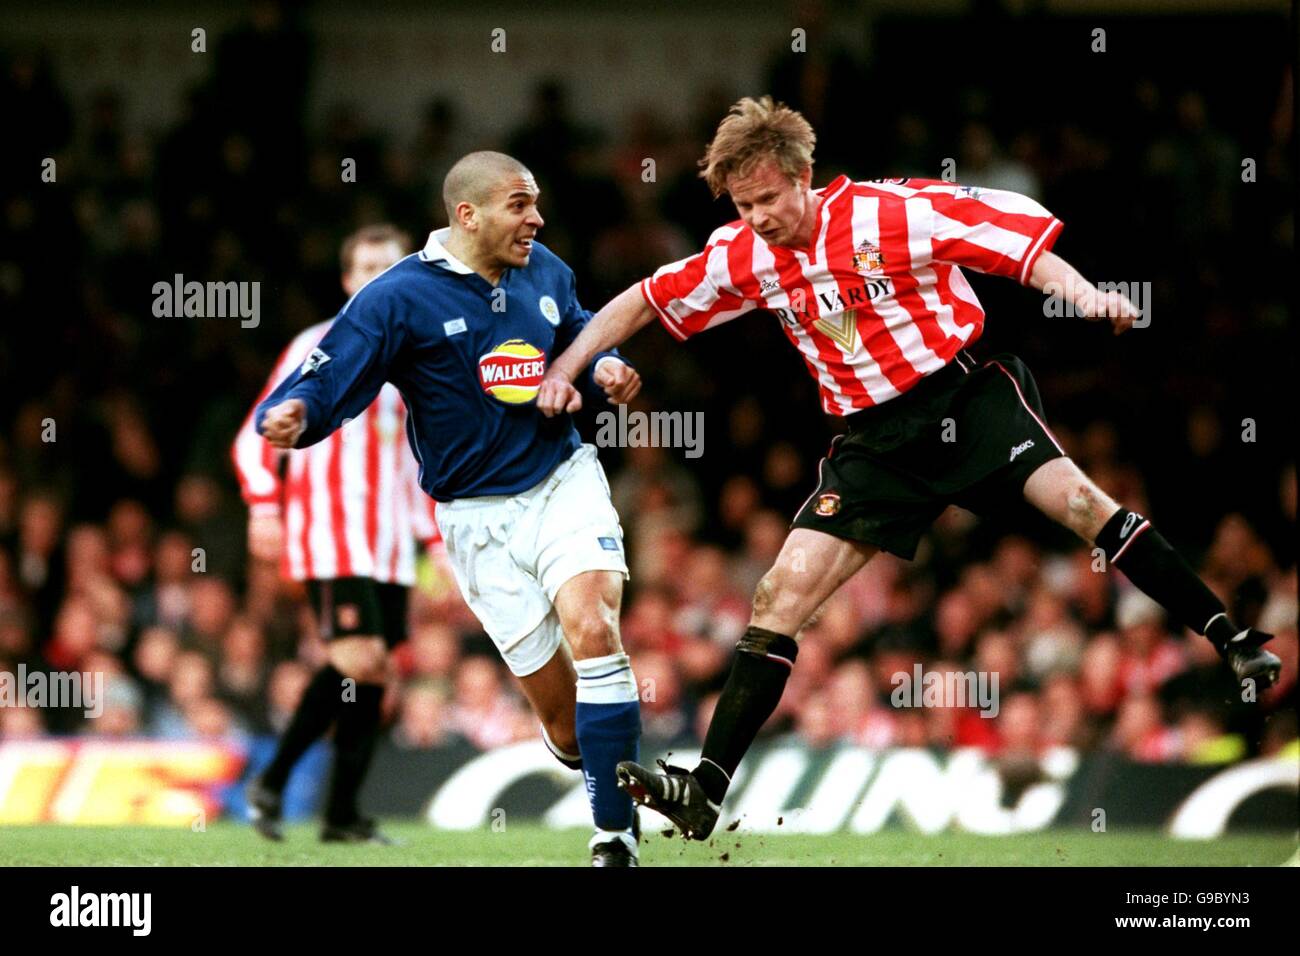 Leicester City's Stan Collymore (l) beats Sunderland's Jody Craddock (r) to head his second goal Stock Photo